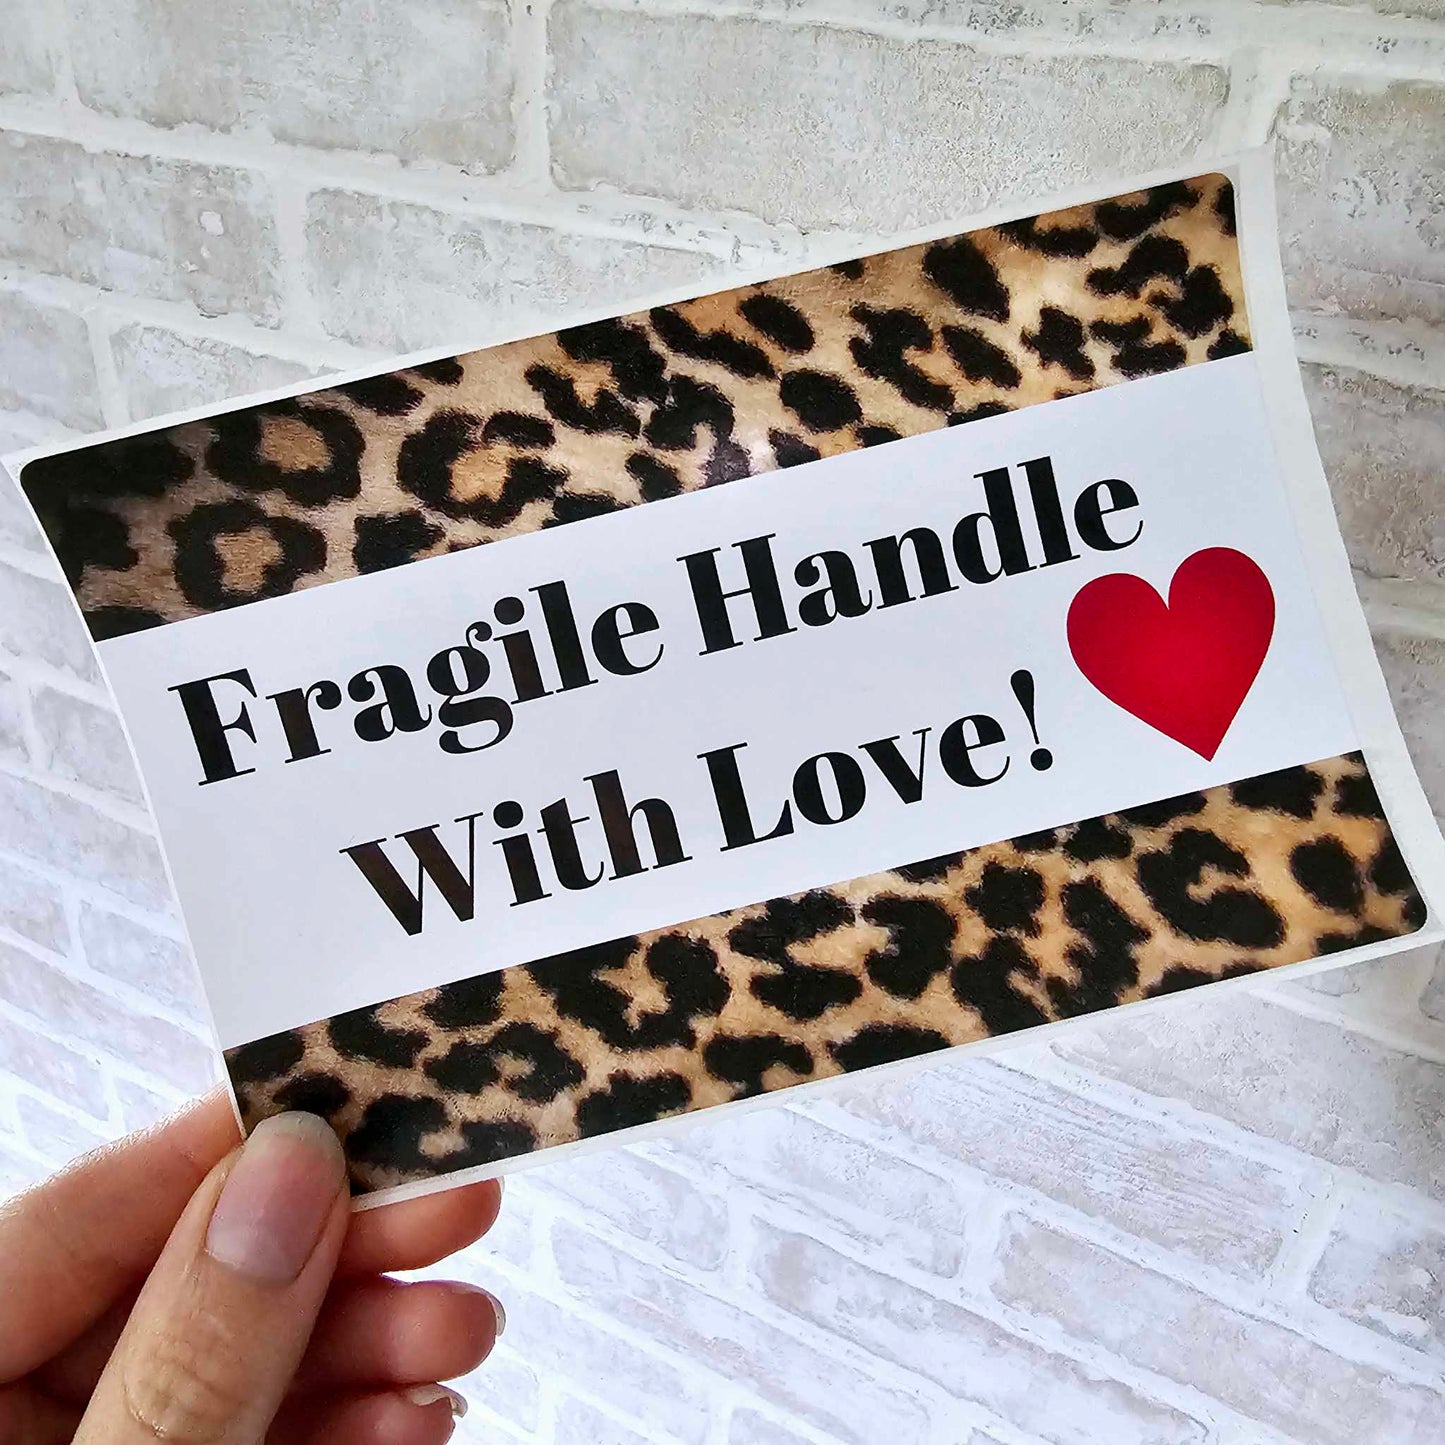 Pack of 20: 4x6 Labels Fragile Handle With Love Cheetah Stickers Gloss